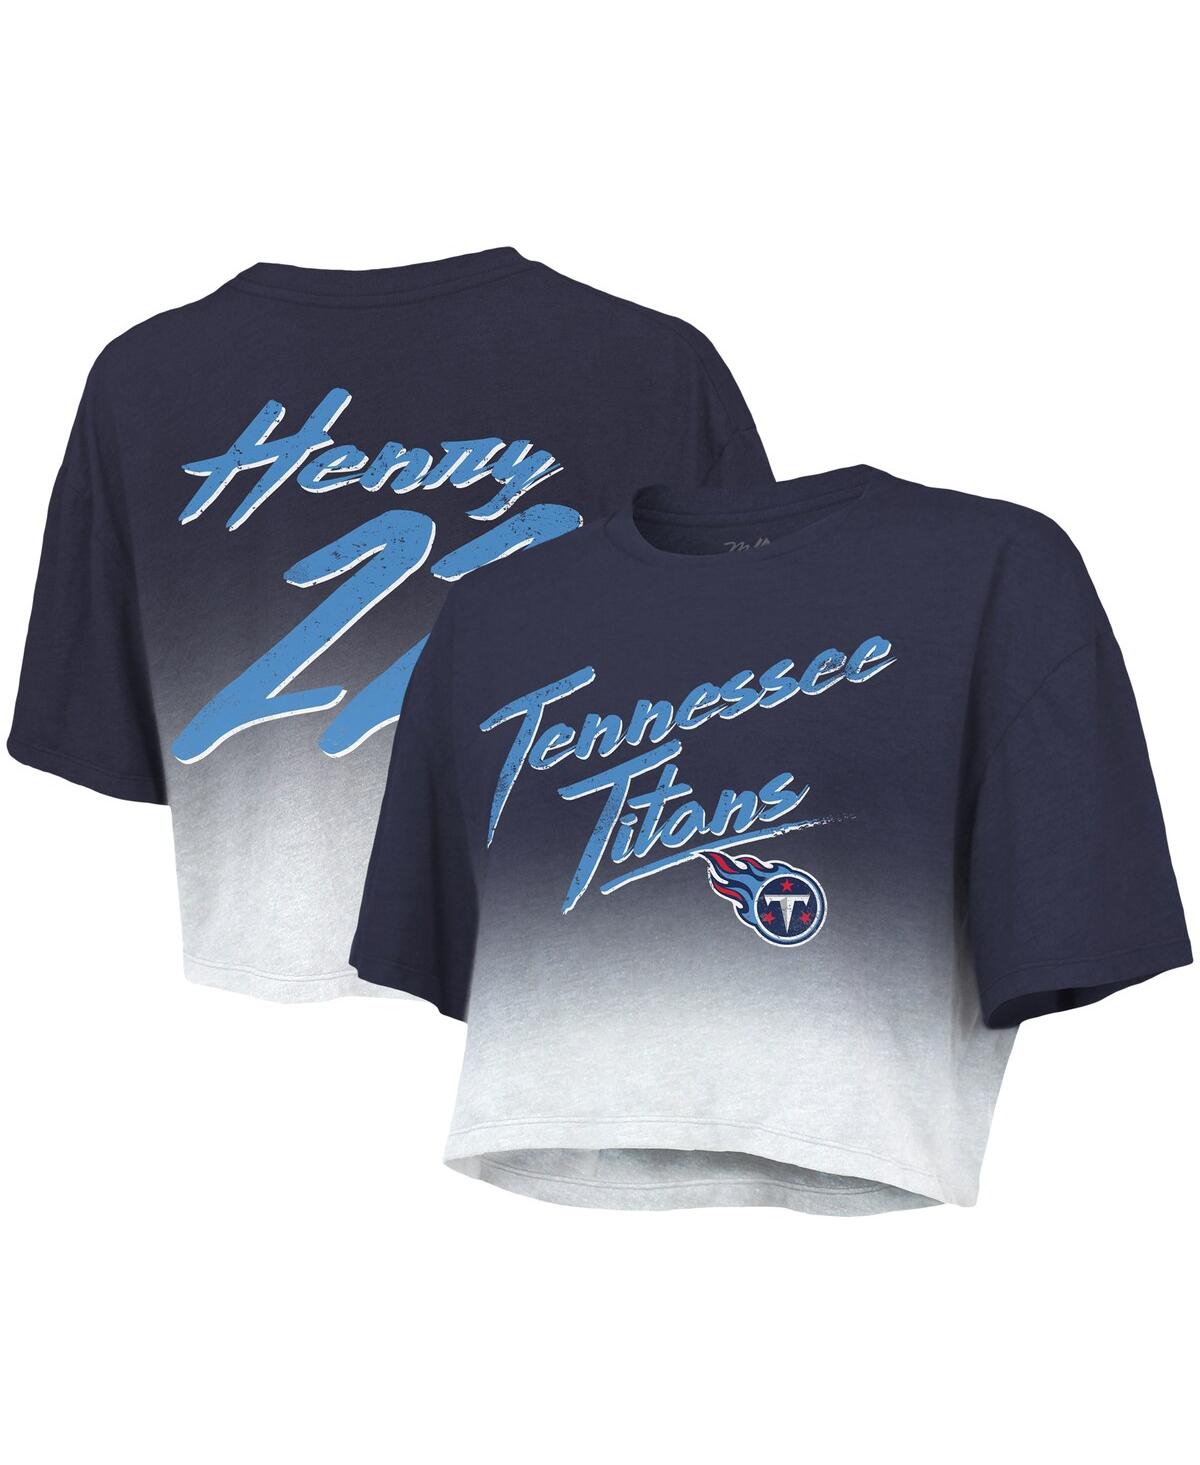 Women's Majestic Threads Derrick Henry Navy, White Tennessee Titans Drip-Dye Player Name and Number Tri-Blend Crop T-shirt - Navy, White